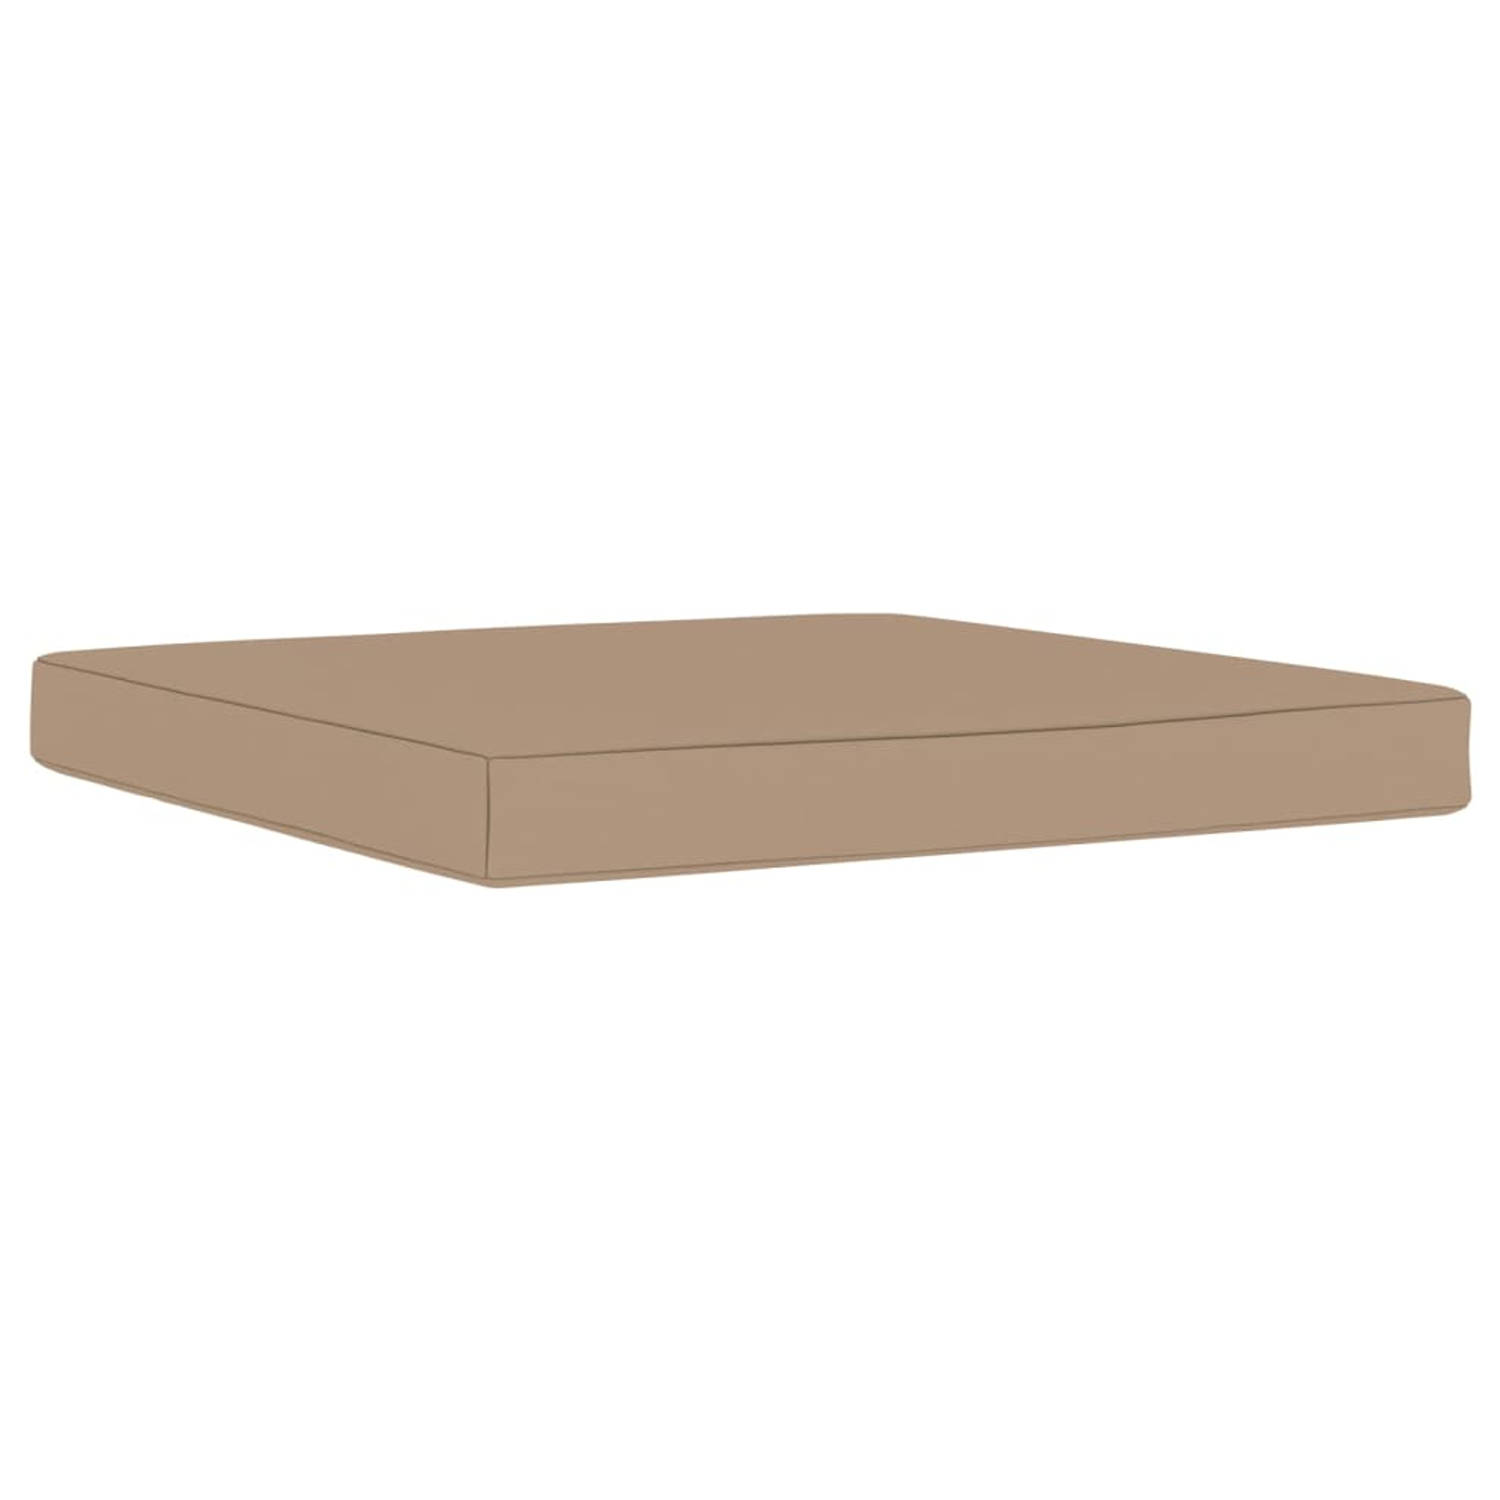 The Living Store Palletkussen - Taupe - 60x61.5x6 cm - Dikke voering